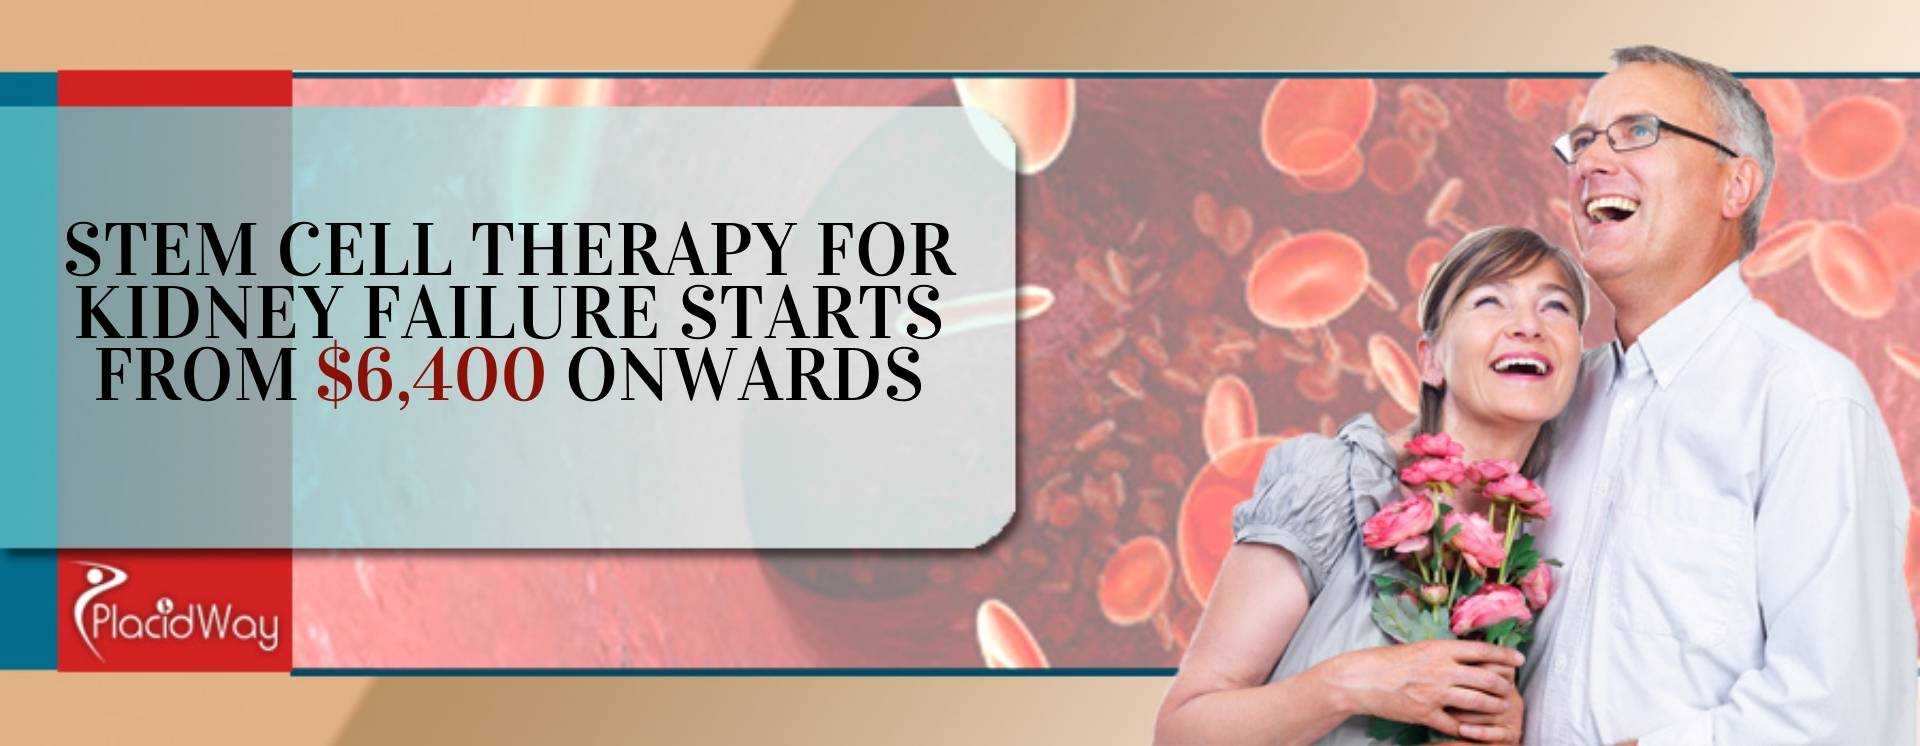 Stem Cell Therapy for Kidney Failure